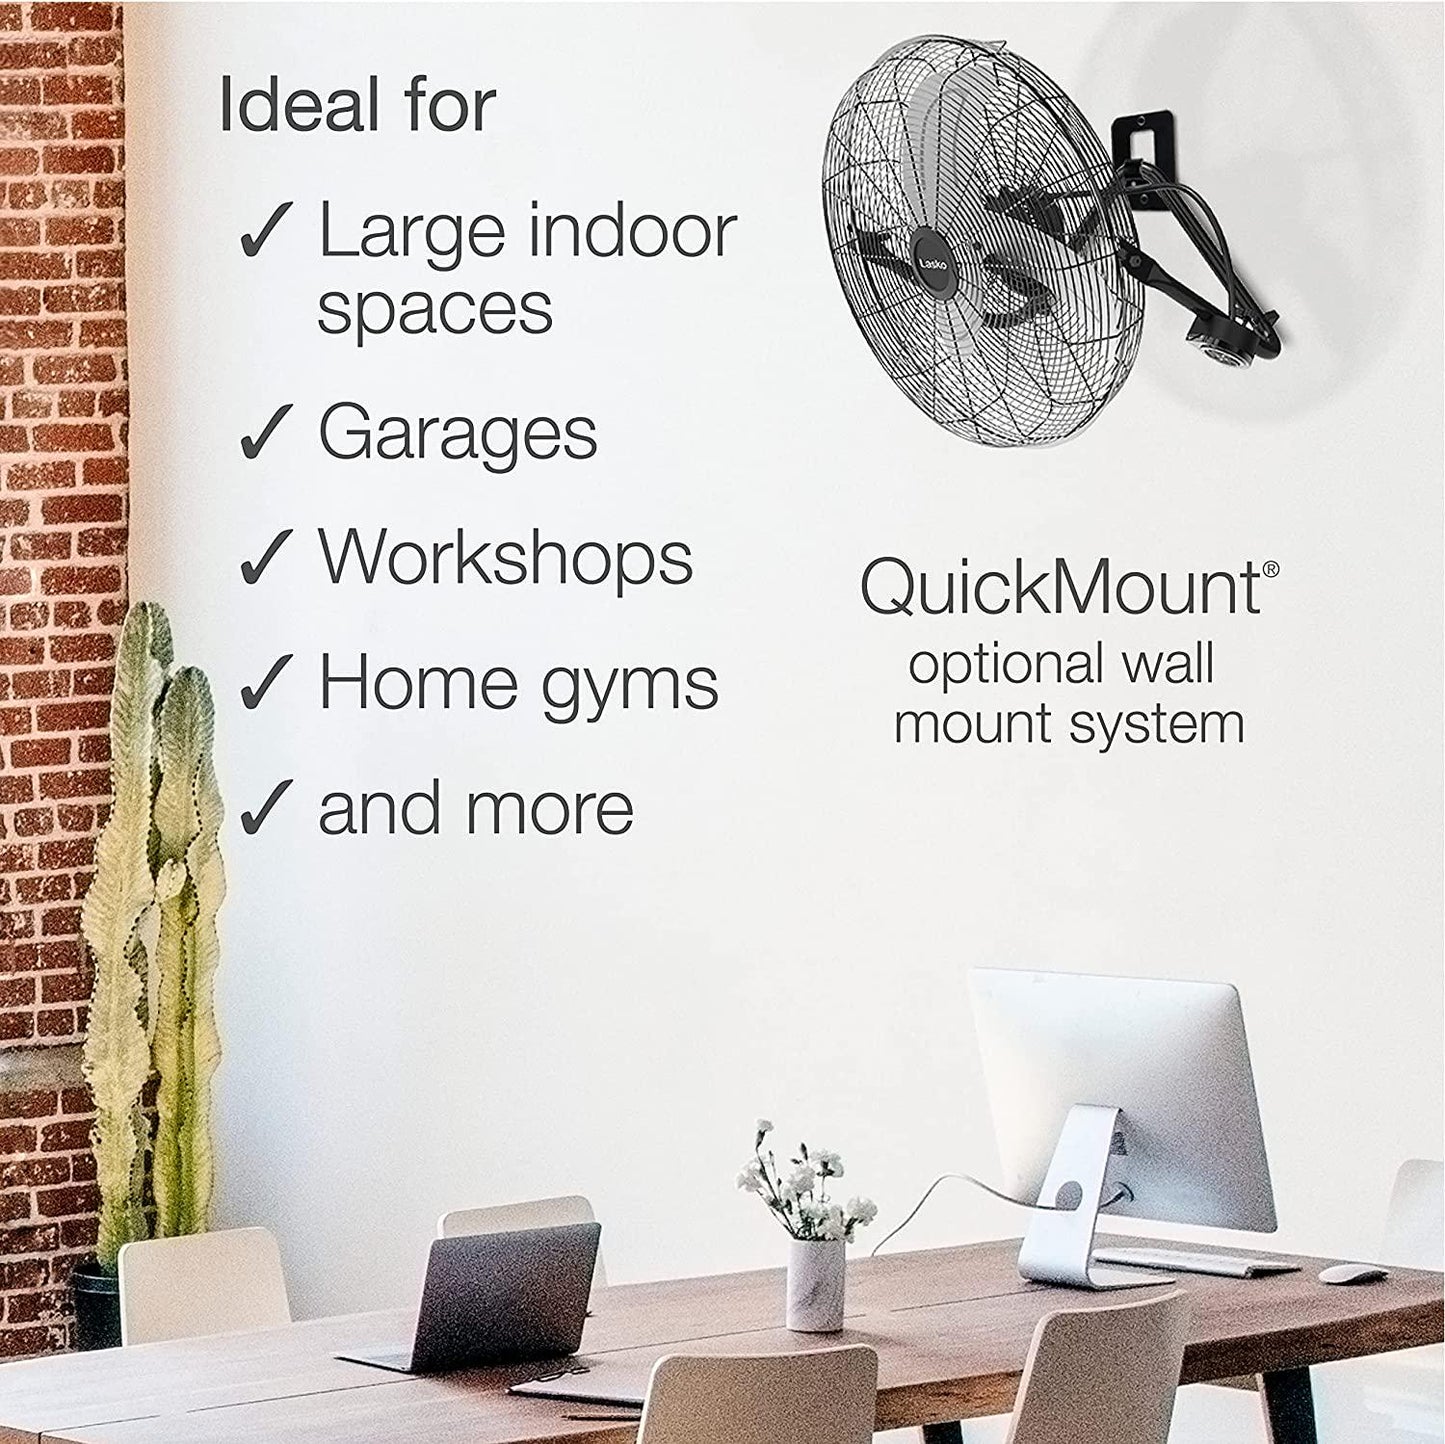 High Velocity Fan with QuickMount for Floor or Wall Mount Use, 3 Powerful Speeds, Remote Control for Garage, Shop, Attic, 20 , Black, H20660